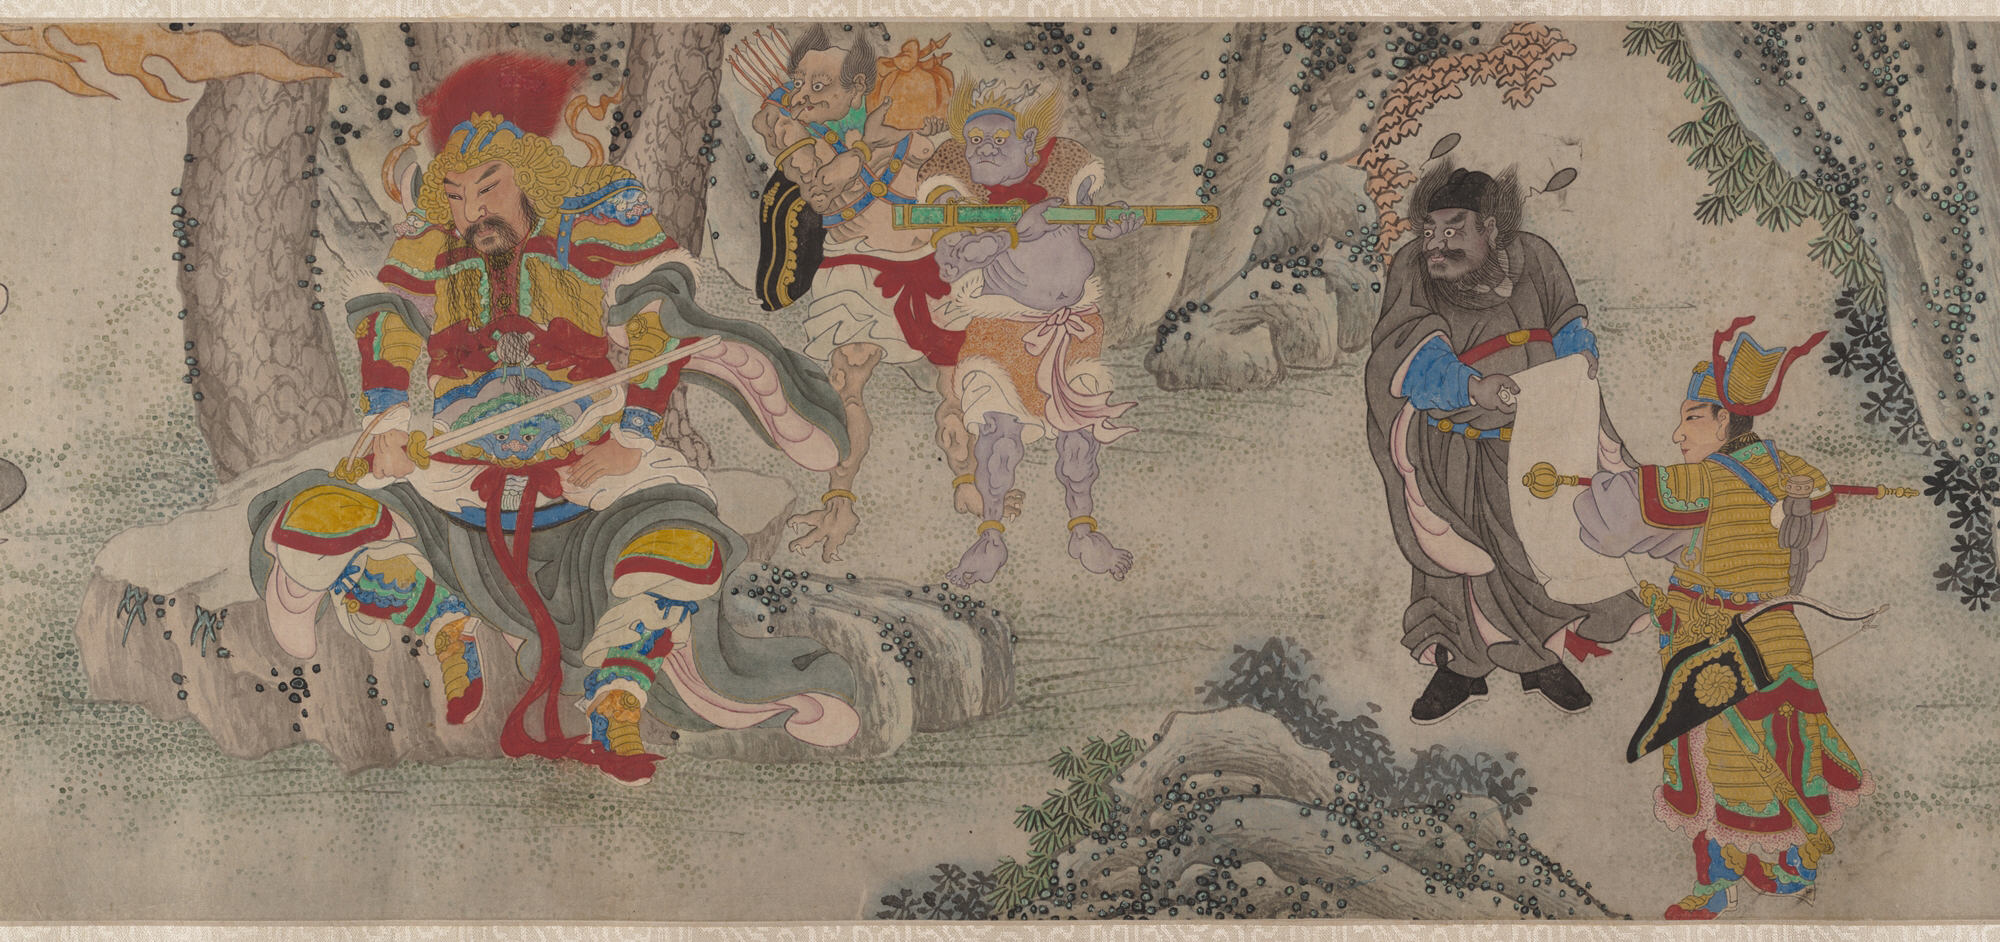 A scroll painting from the Song Dynasty depicting a mountain exorcism by Erlang, in color. Erlang on the left is decked out in full military gear as a high-ranking general, assisted by two demons holding his sword's scabbard. On the right is a dark looking civil official holding a scroll, assisted by a minor military officer holding a staff.